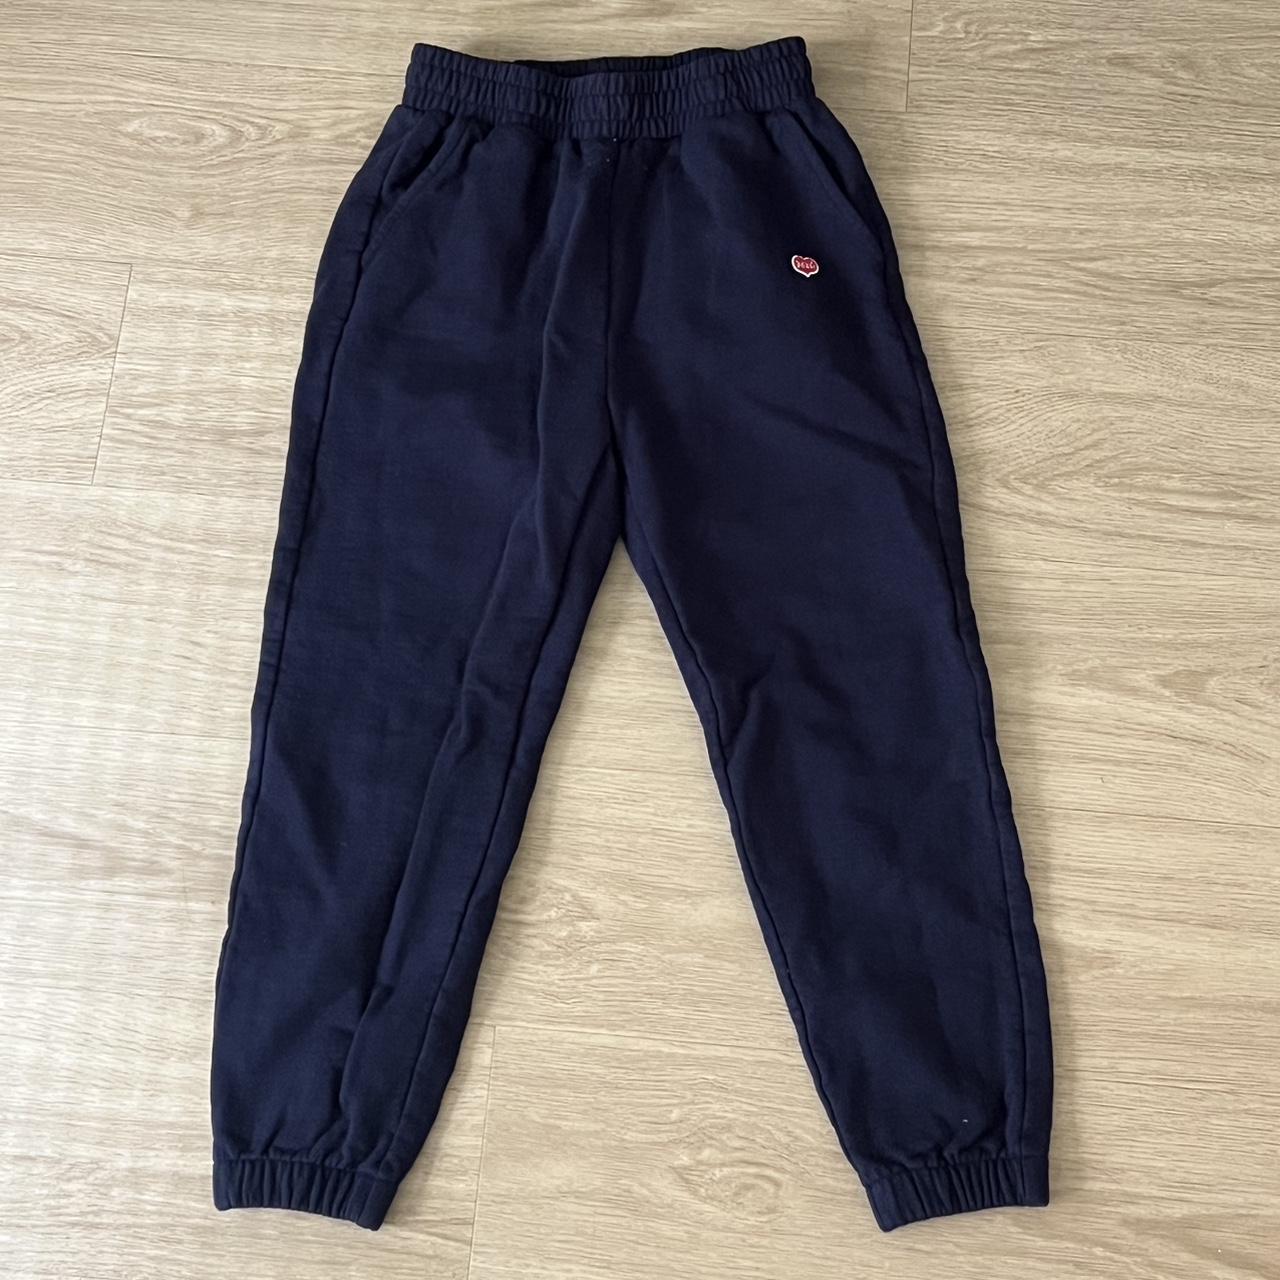 Madhappy Women's Navy and Blue Trousers | Depop